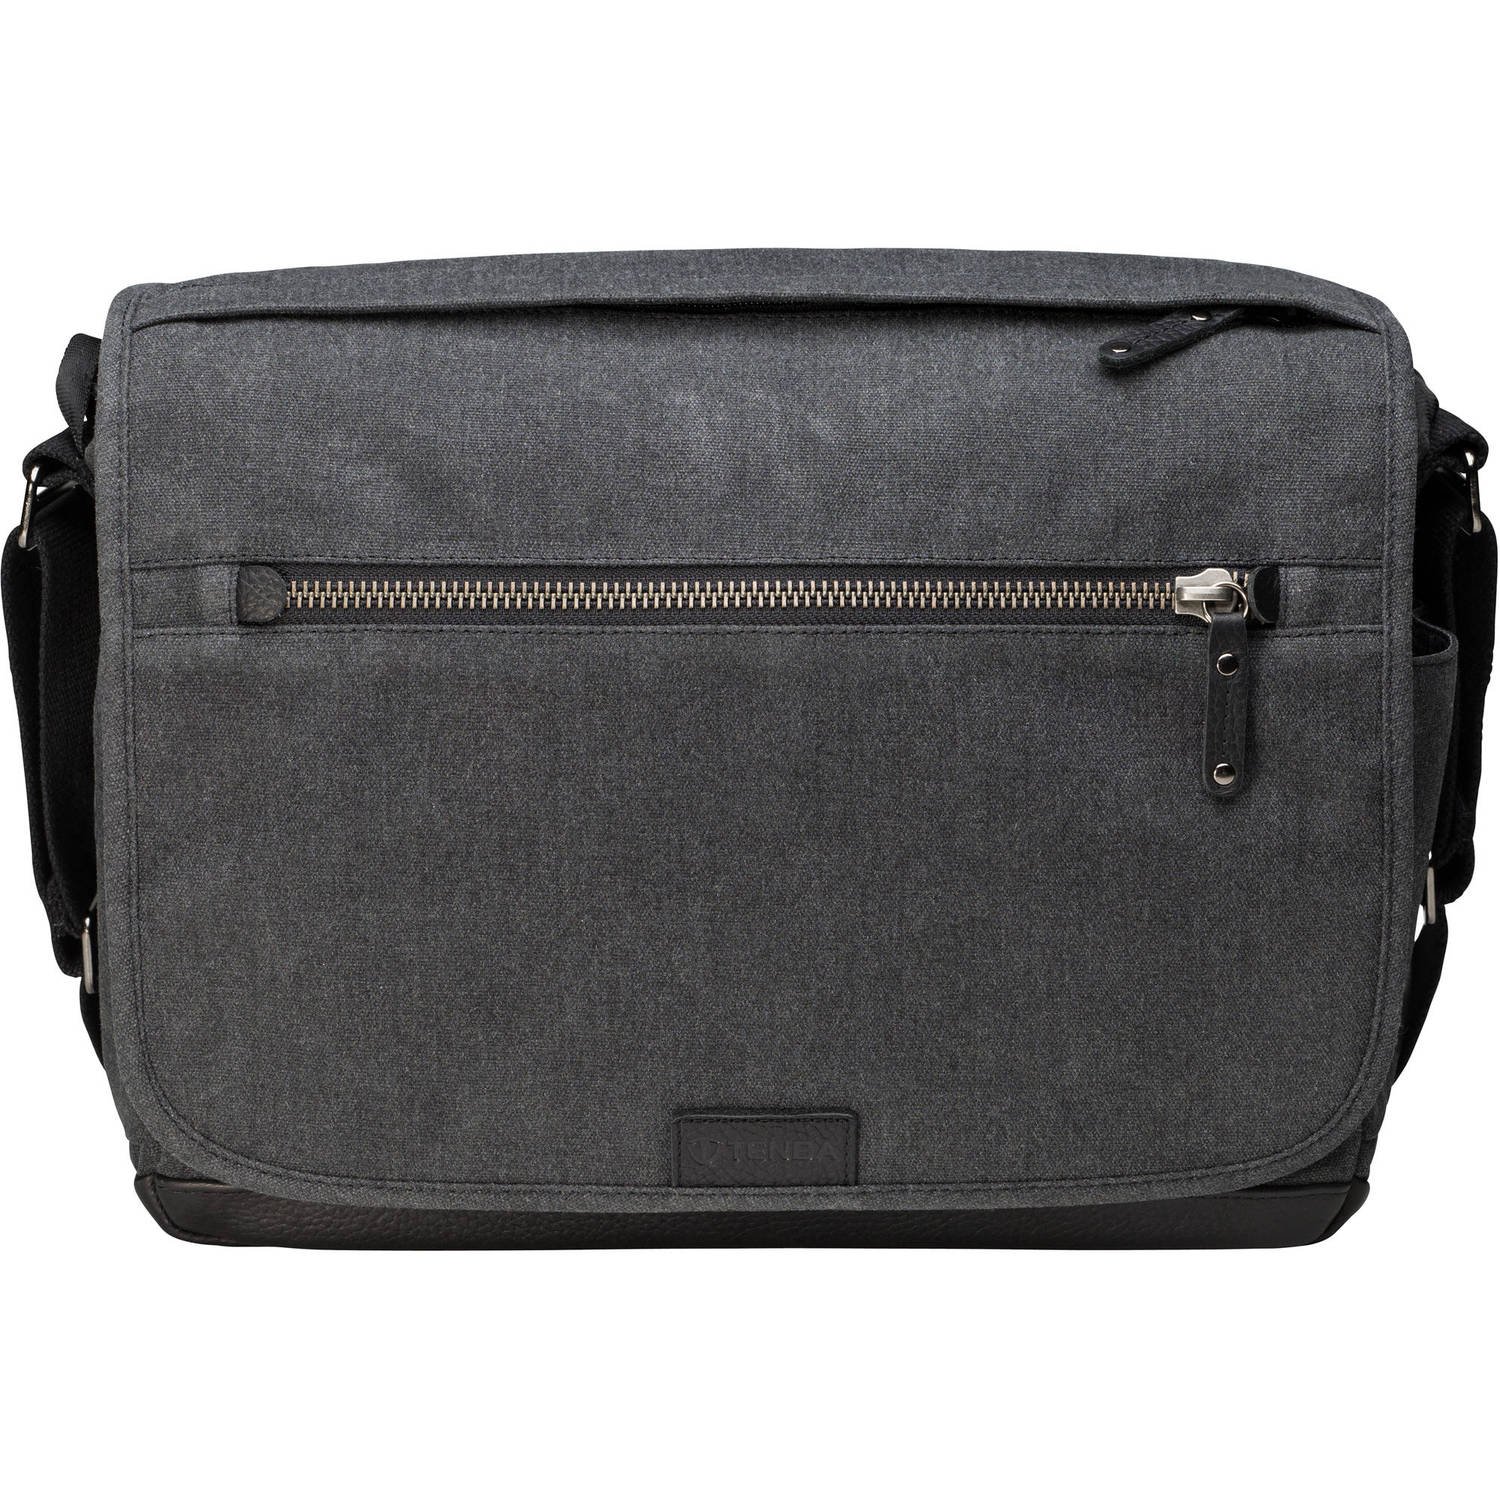 Tenba Cooper 13 DSLR Camera Bag with Leather Accents (Gray)